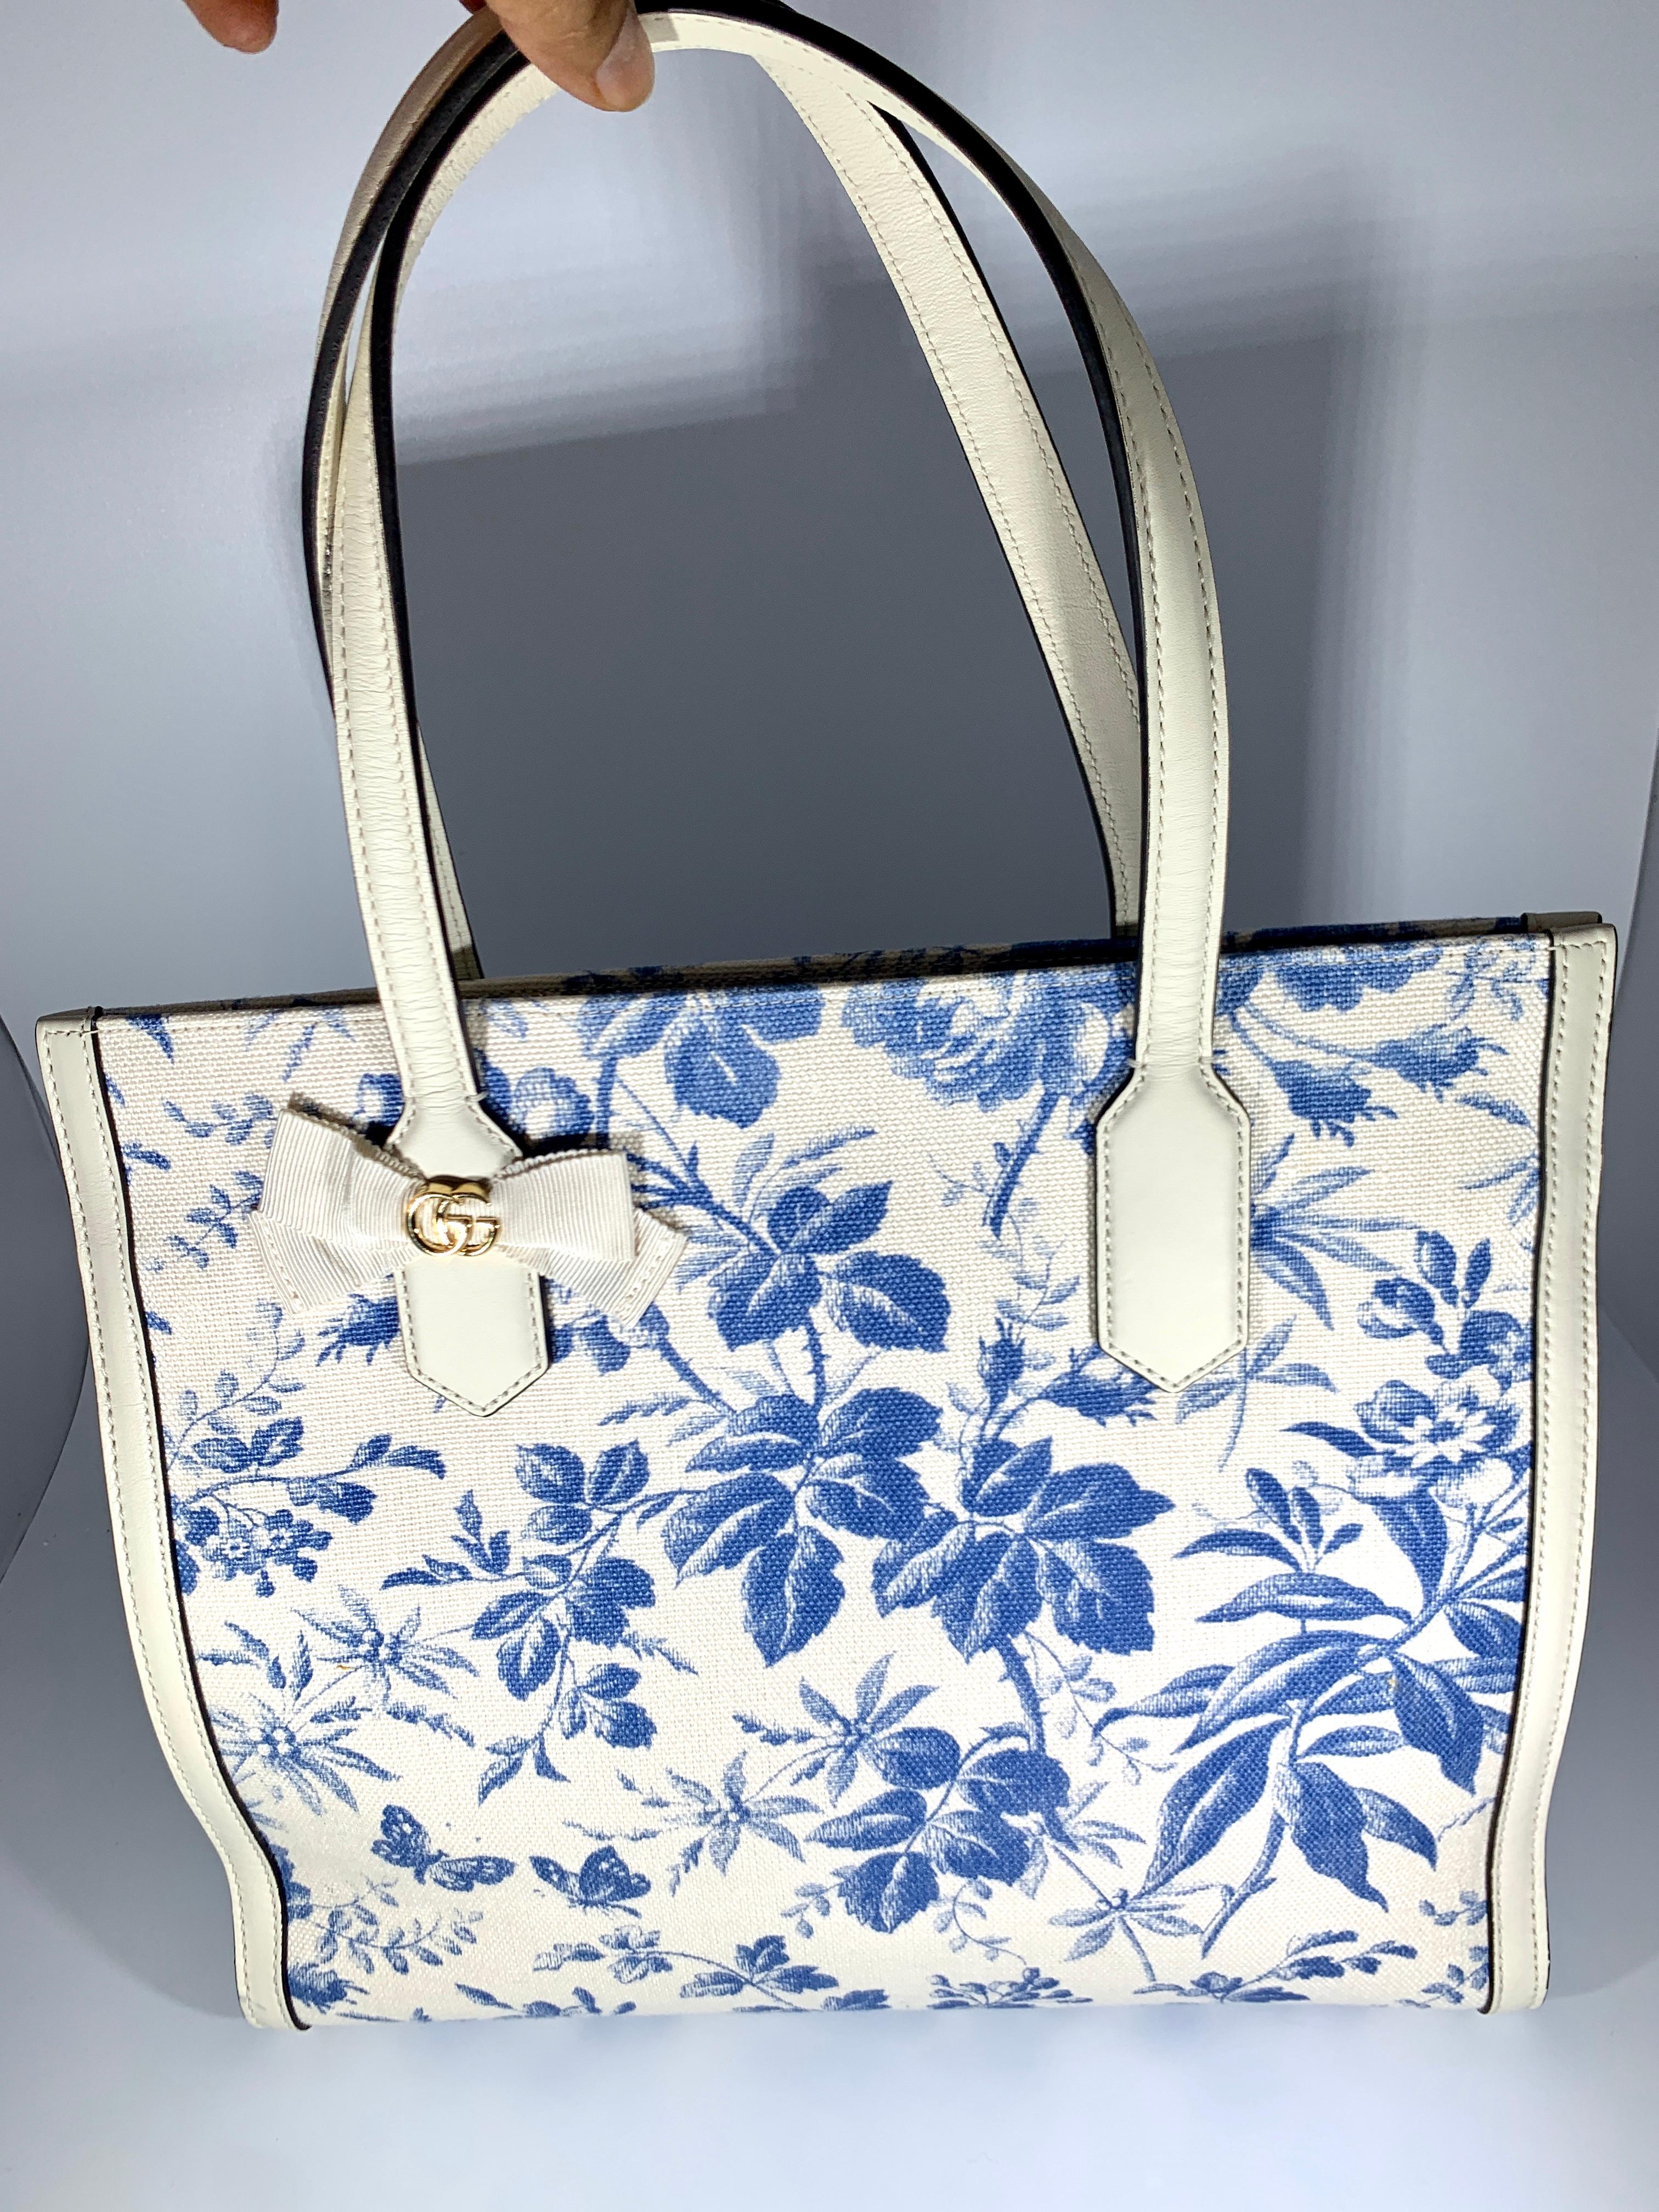  Gucci Flora Whites Canvas Leather Trim Navy Blue With Flowers  Tote Handbag  4